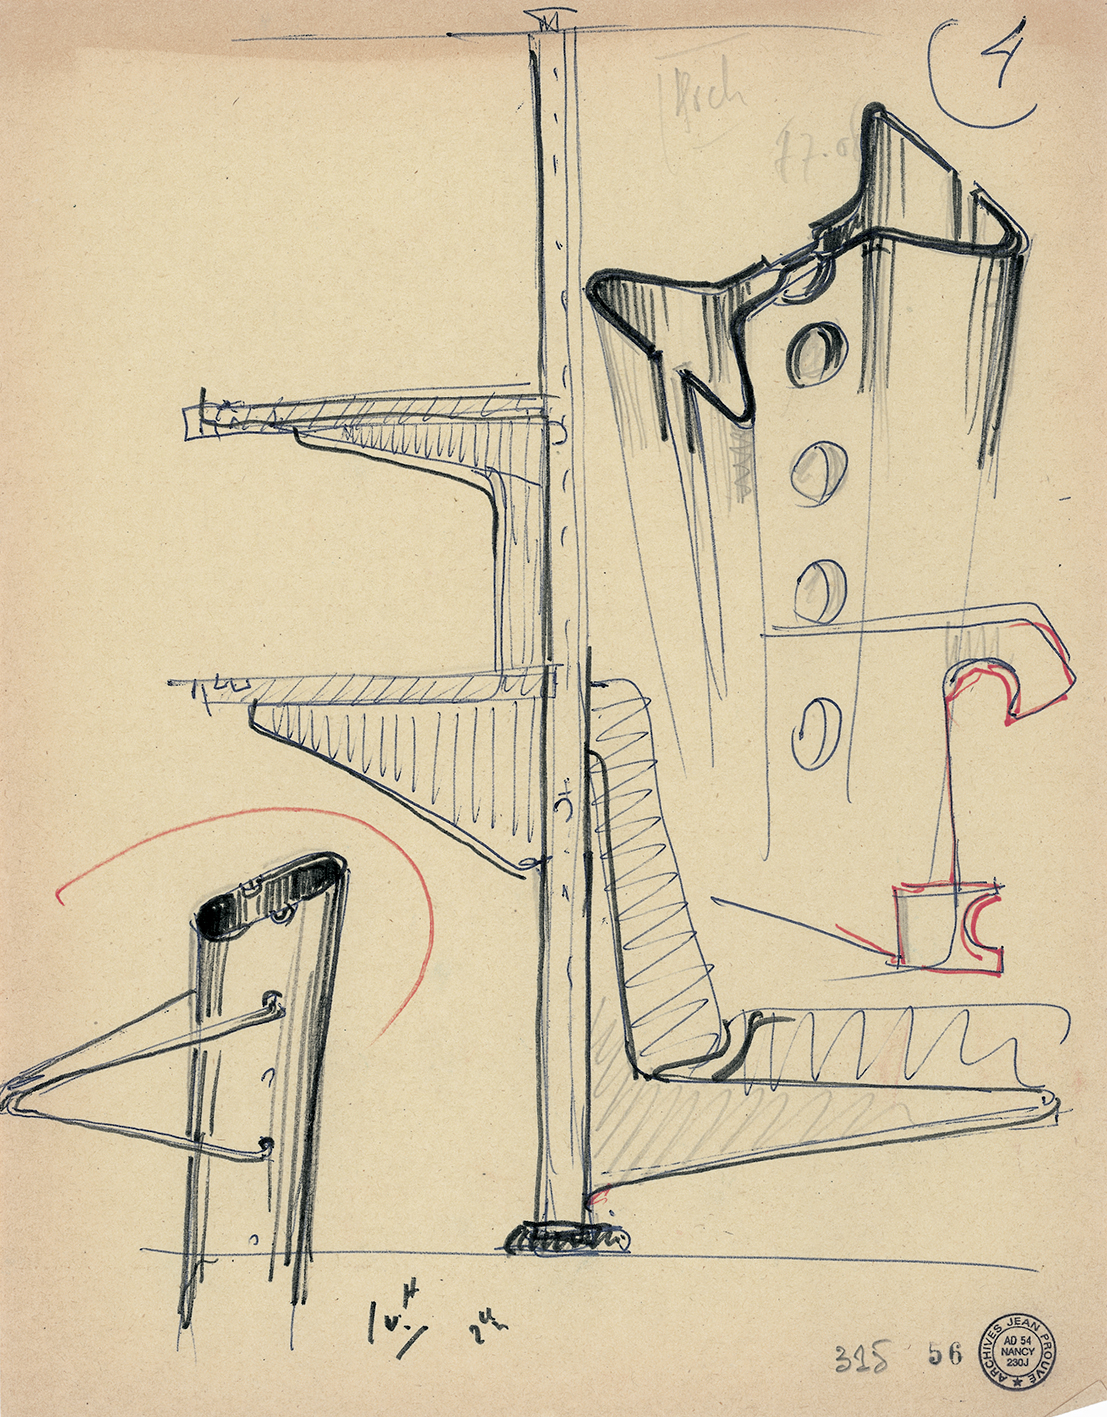 System of support-channels and brackets on pistons for a double-sided “meuble équilibré” with shelves and bench. Sketch by Jean Prouvé for his classes at CNAM, Paris, 1957–1971.